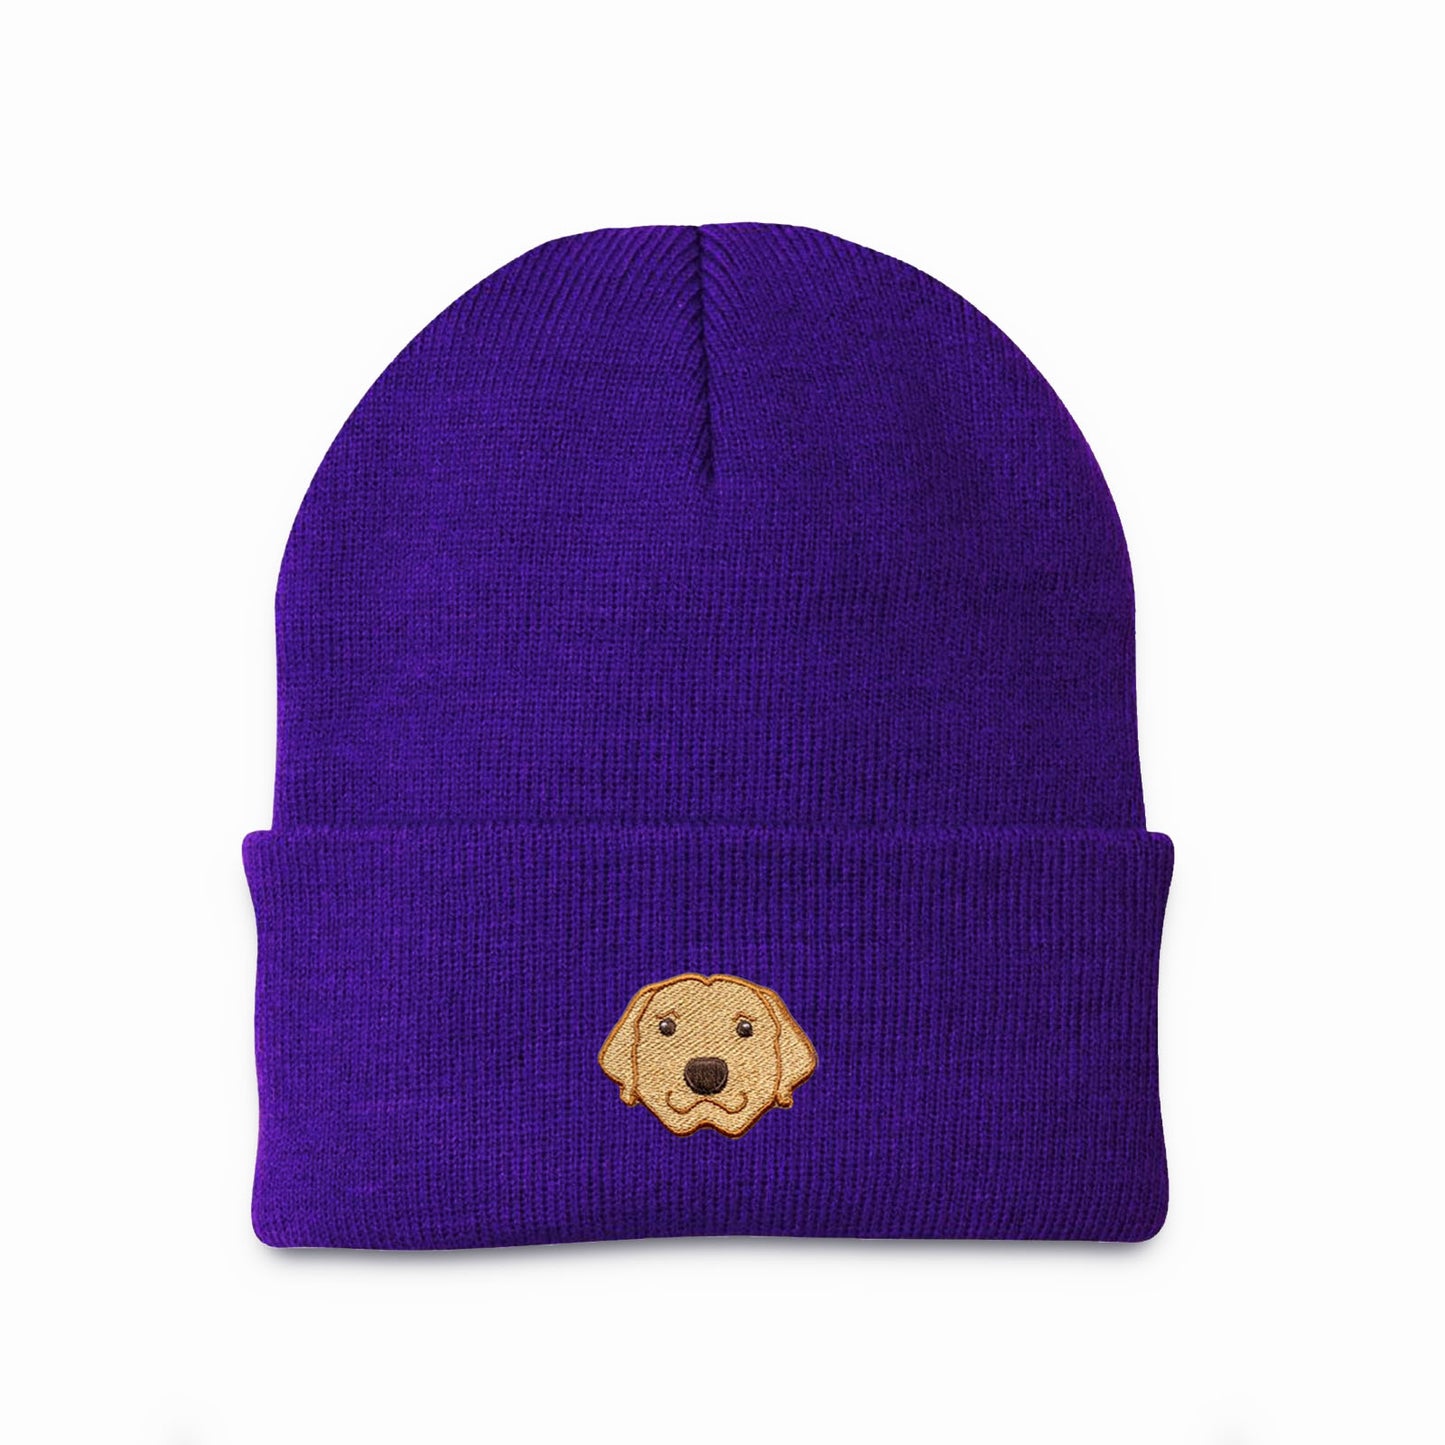 Purple Custom Dog beanie personalized and embroidered on the front.